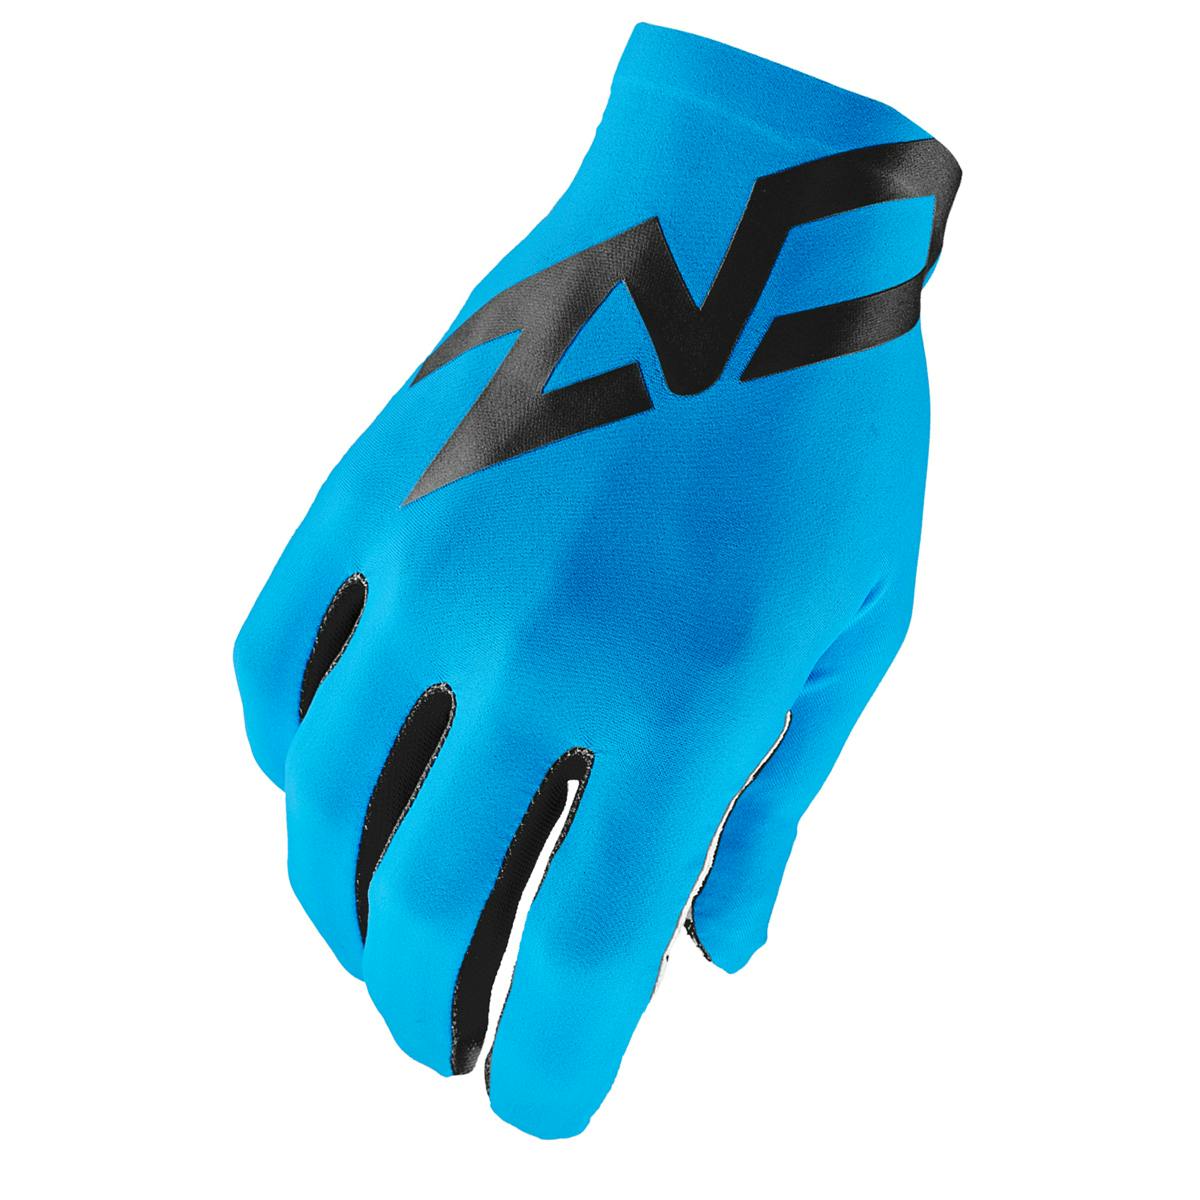 Supacaz SupaG Long Gloves Twisted - Neon Blue - Small